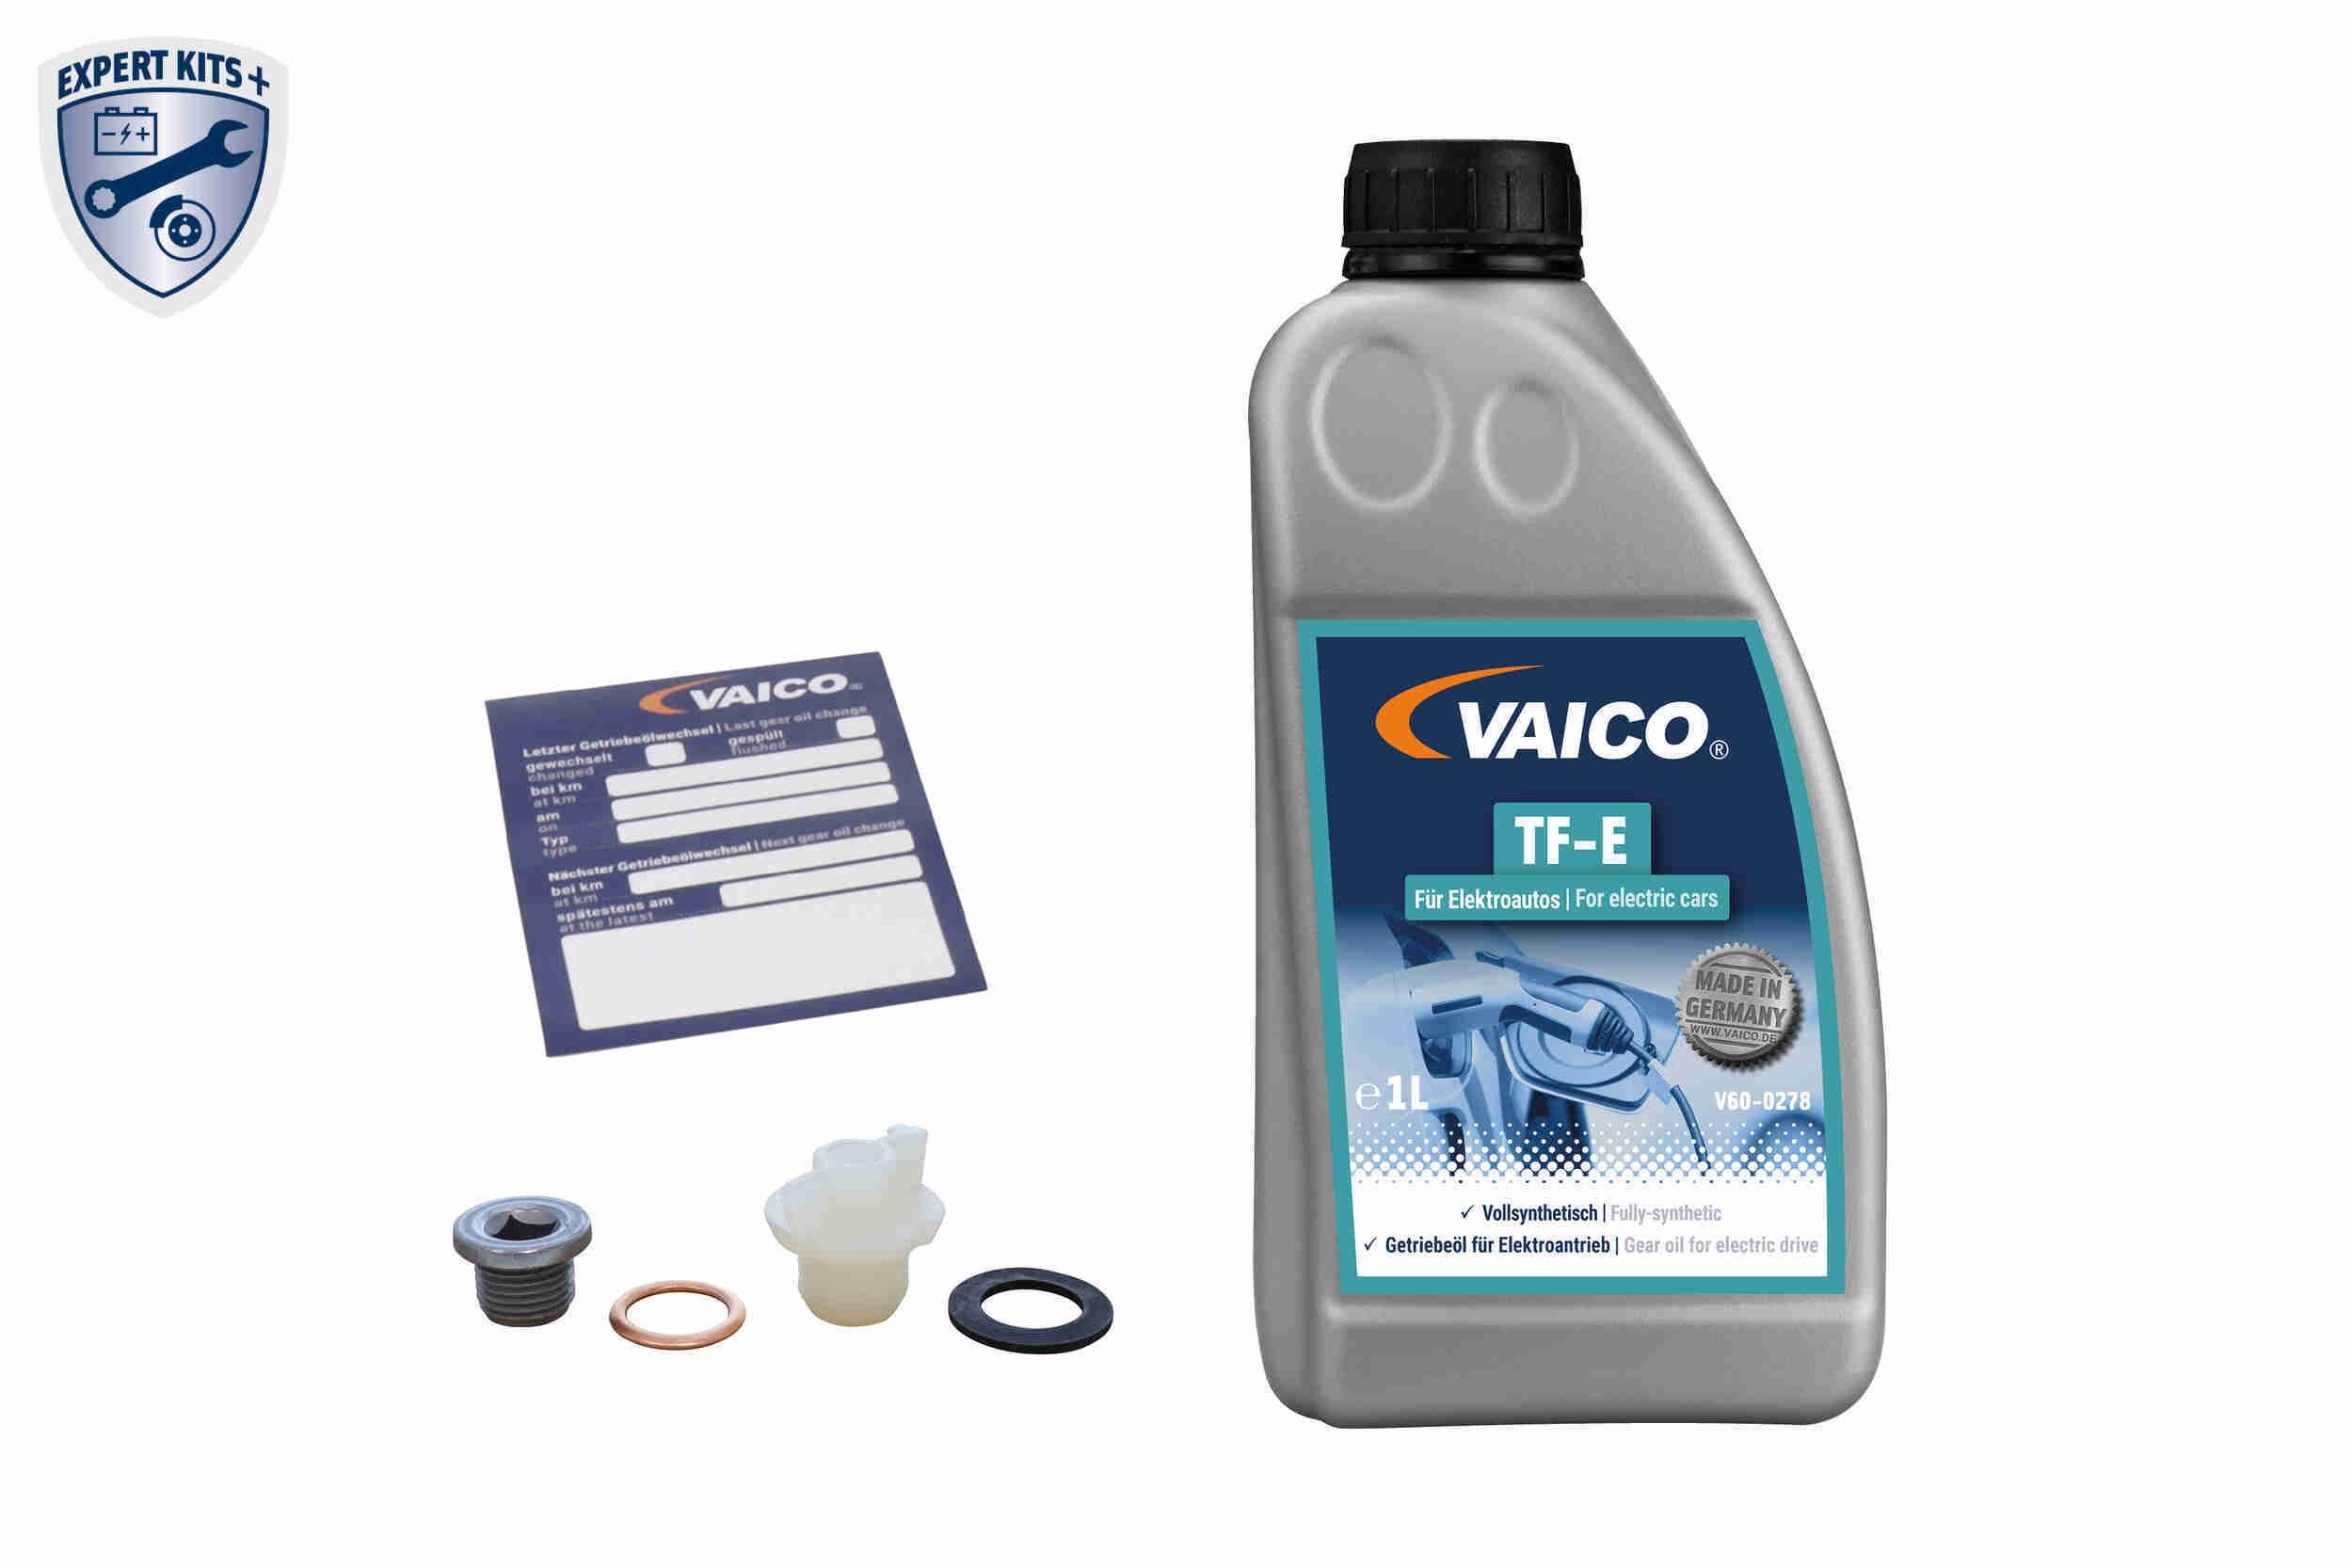 VAV30-4468 - A 001 989 VAICO Front Axle, with oil drain plug, with oil quantity for standard oil change Transmission service kit V30-4468 buy